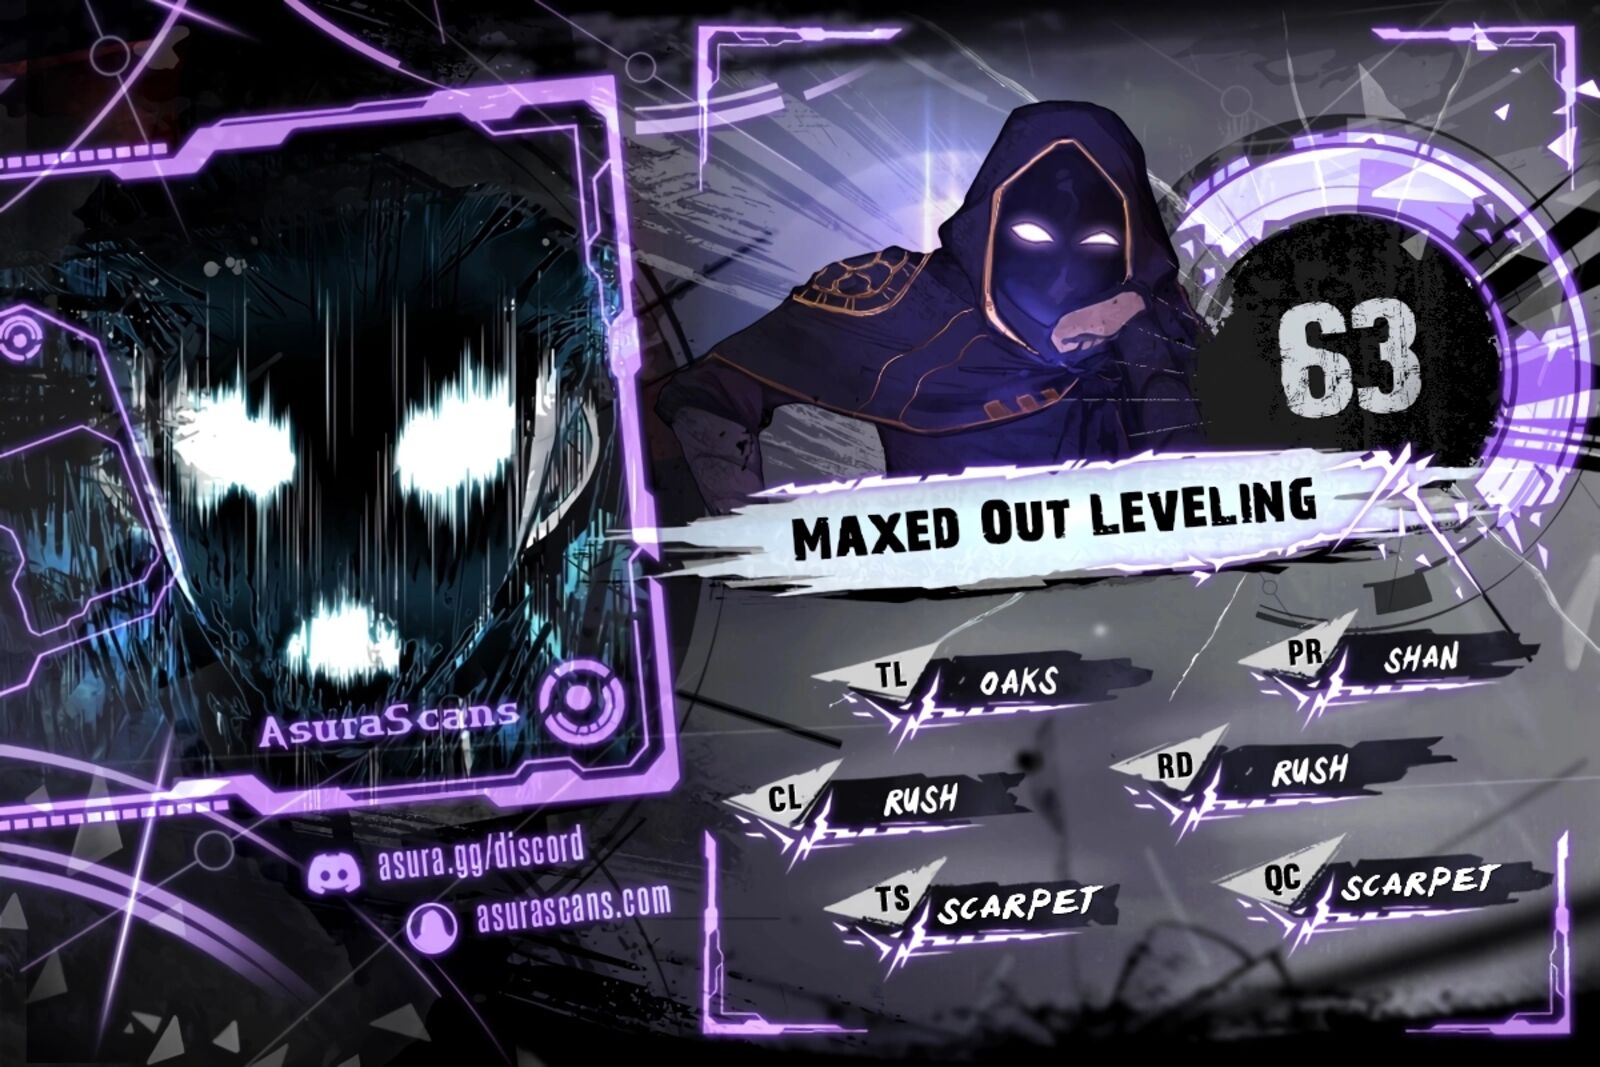 Maxed Out Leveling 63 1